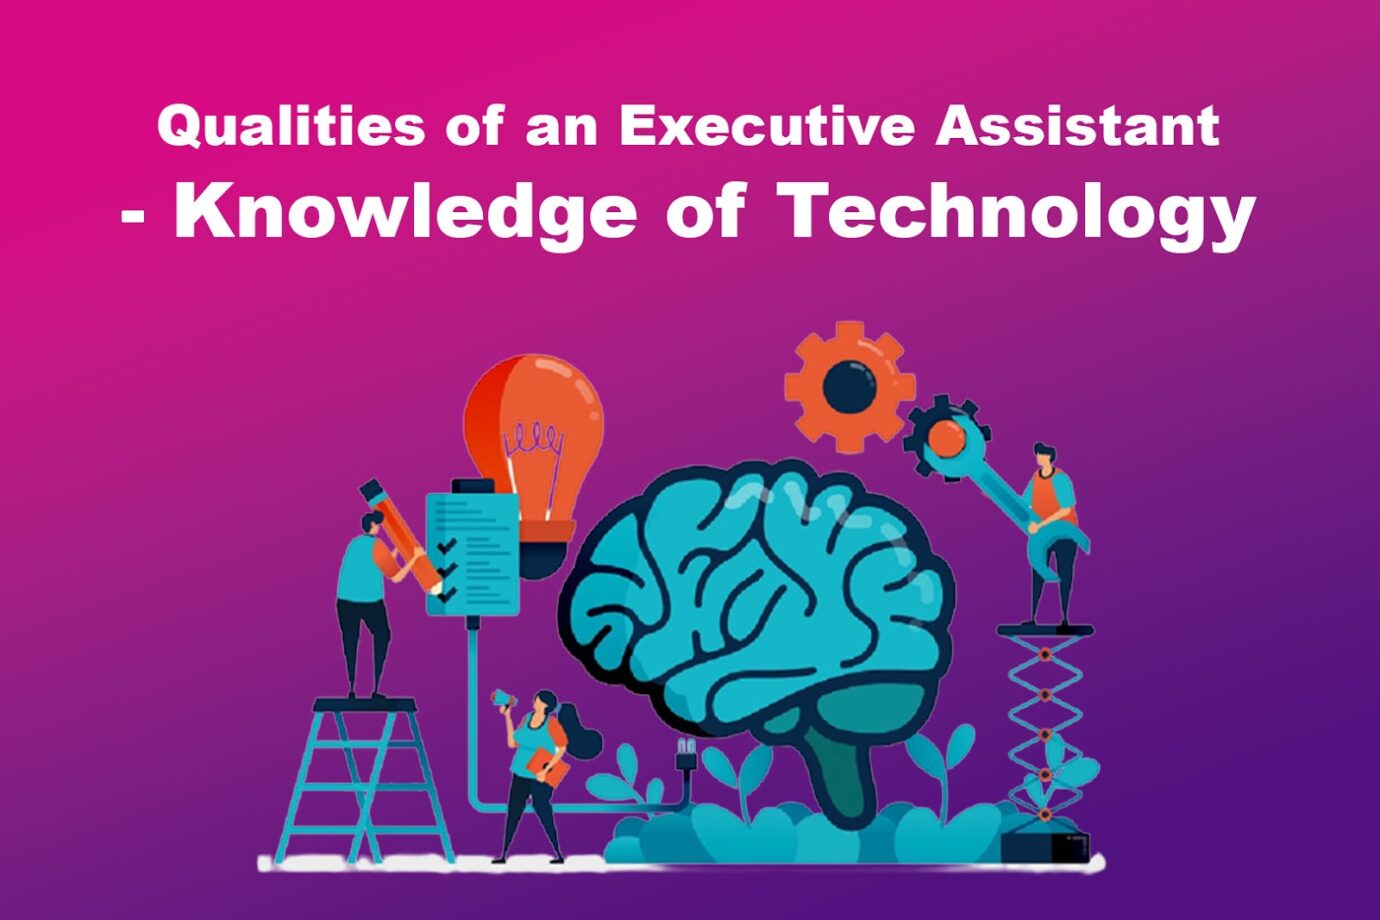 Qualities of an Executive Assistant - Knowledge of Technology